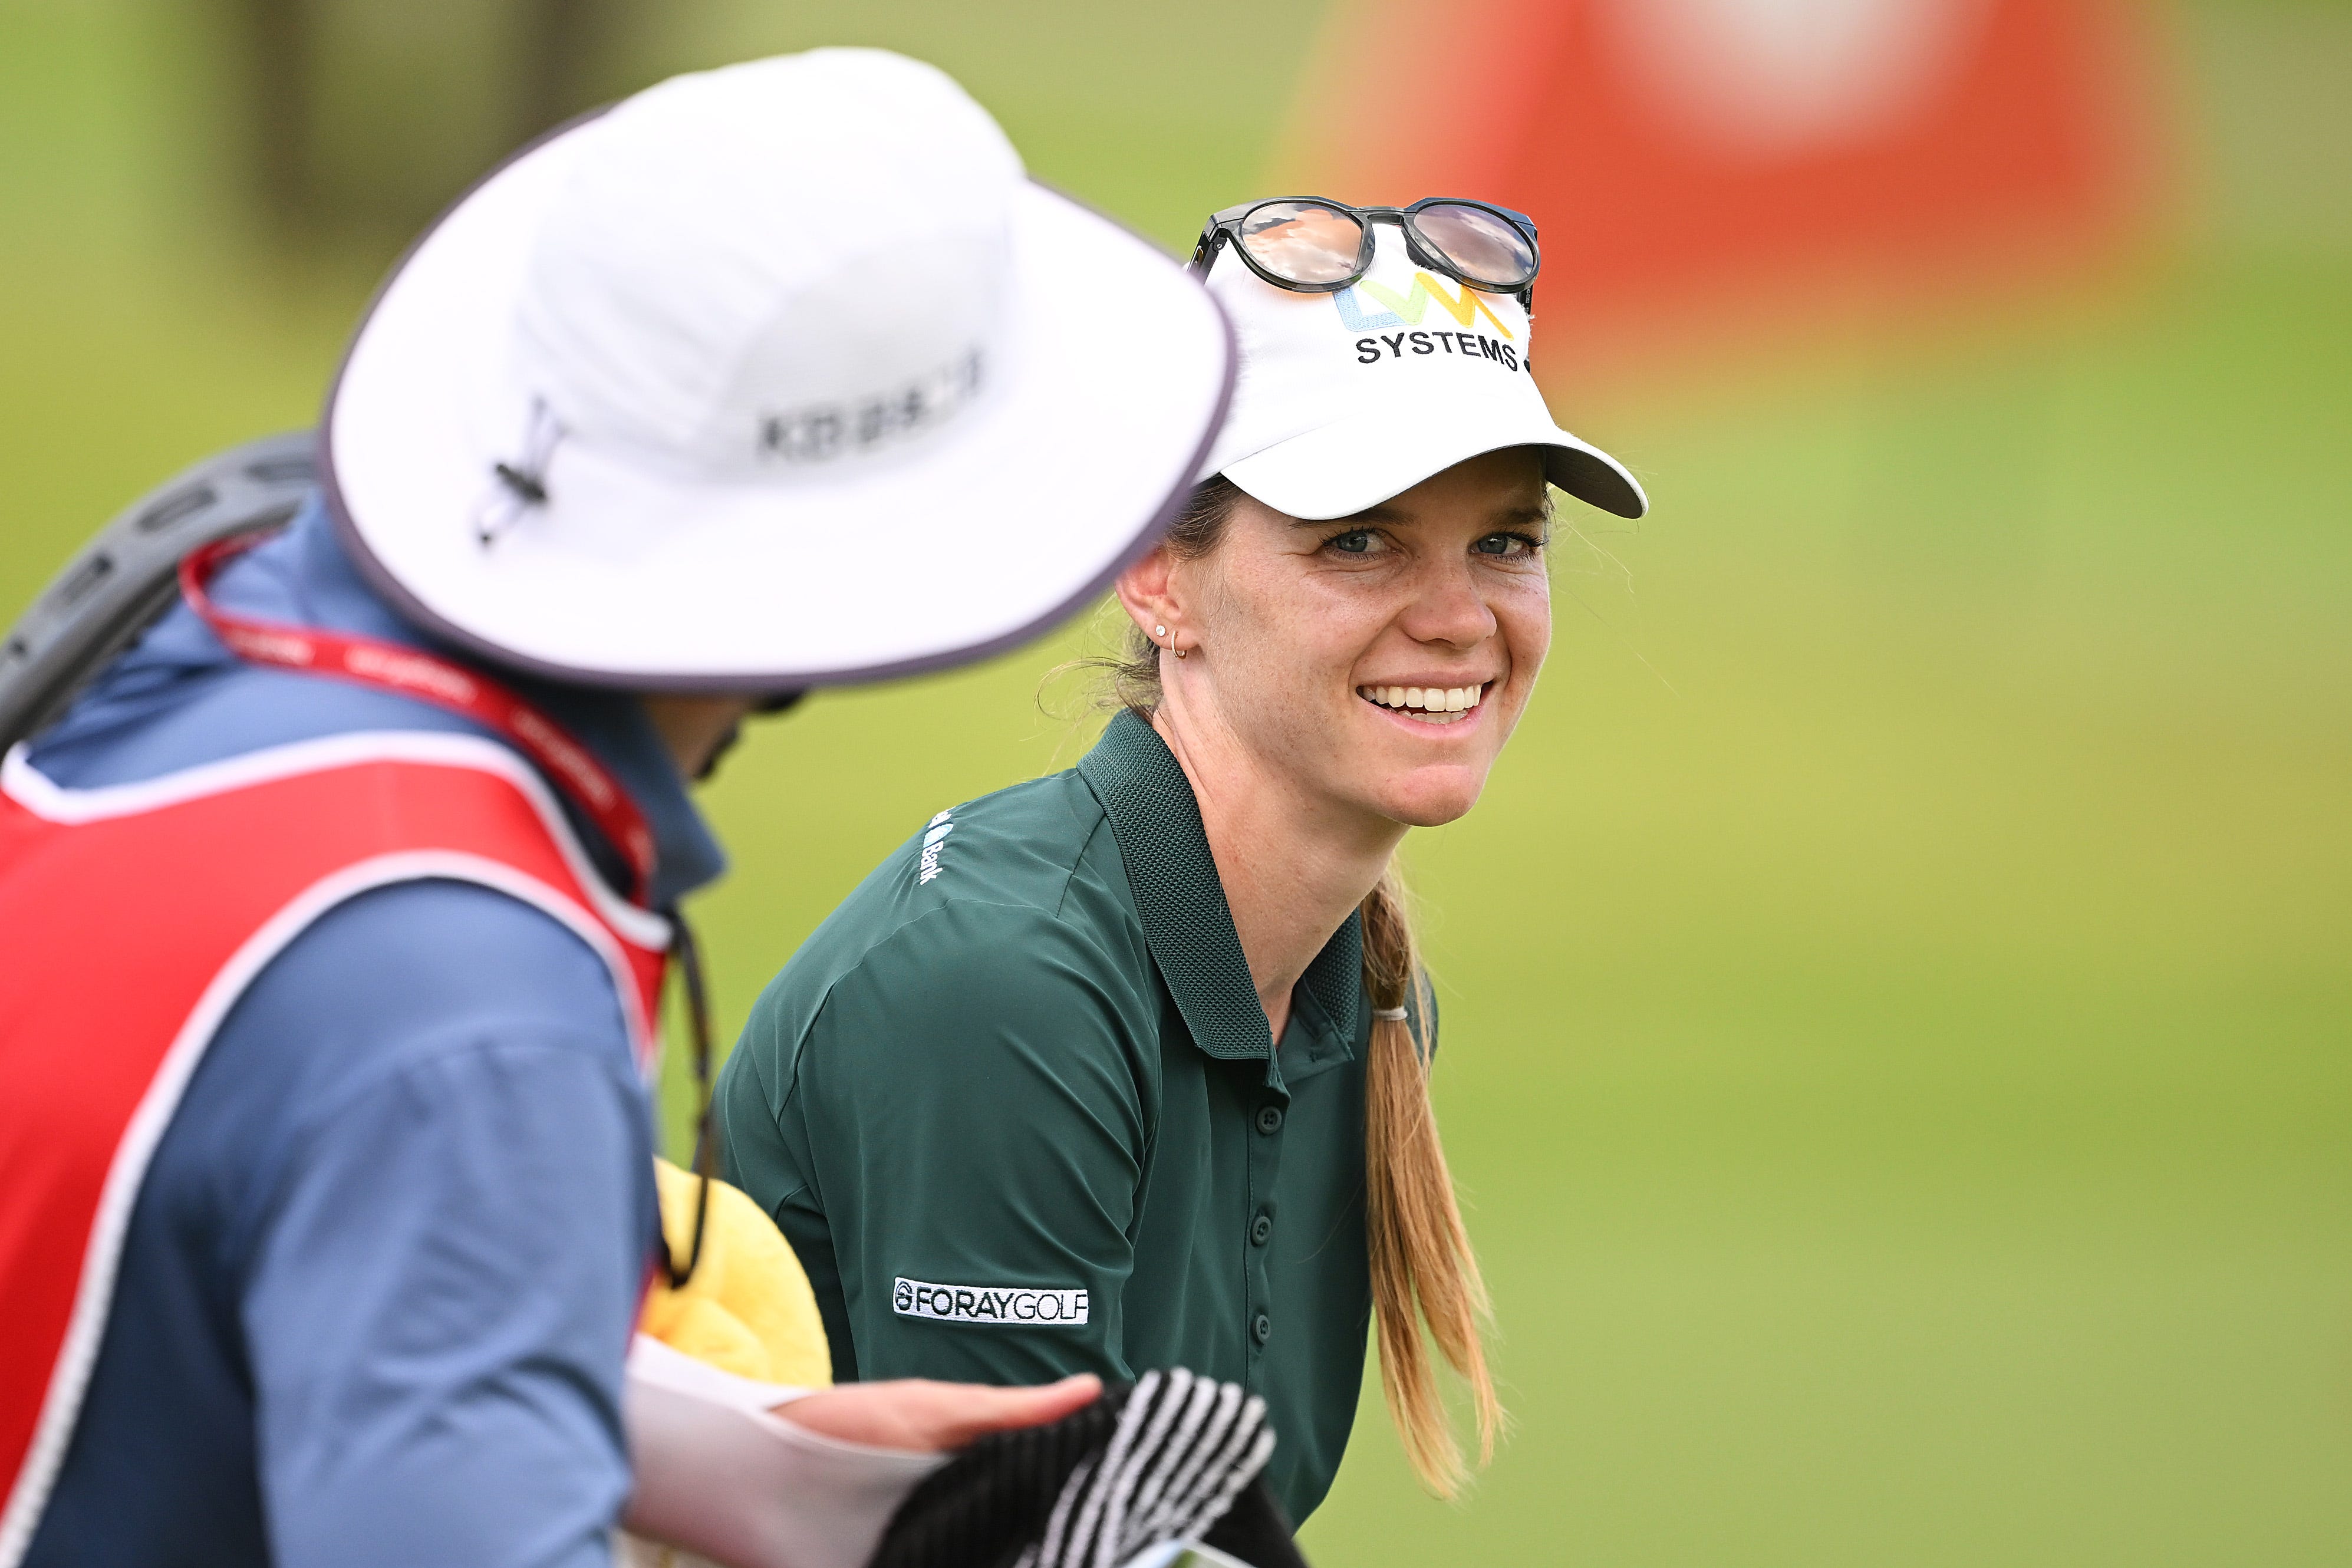 american sarah schmelzel takes early lead at hsbc women's world championship, where scores were unusually high